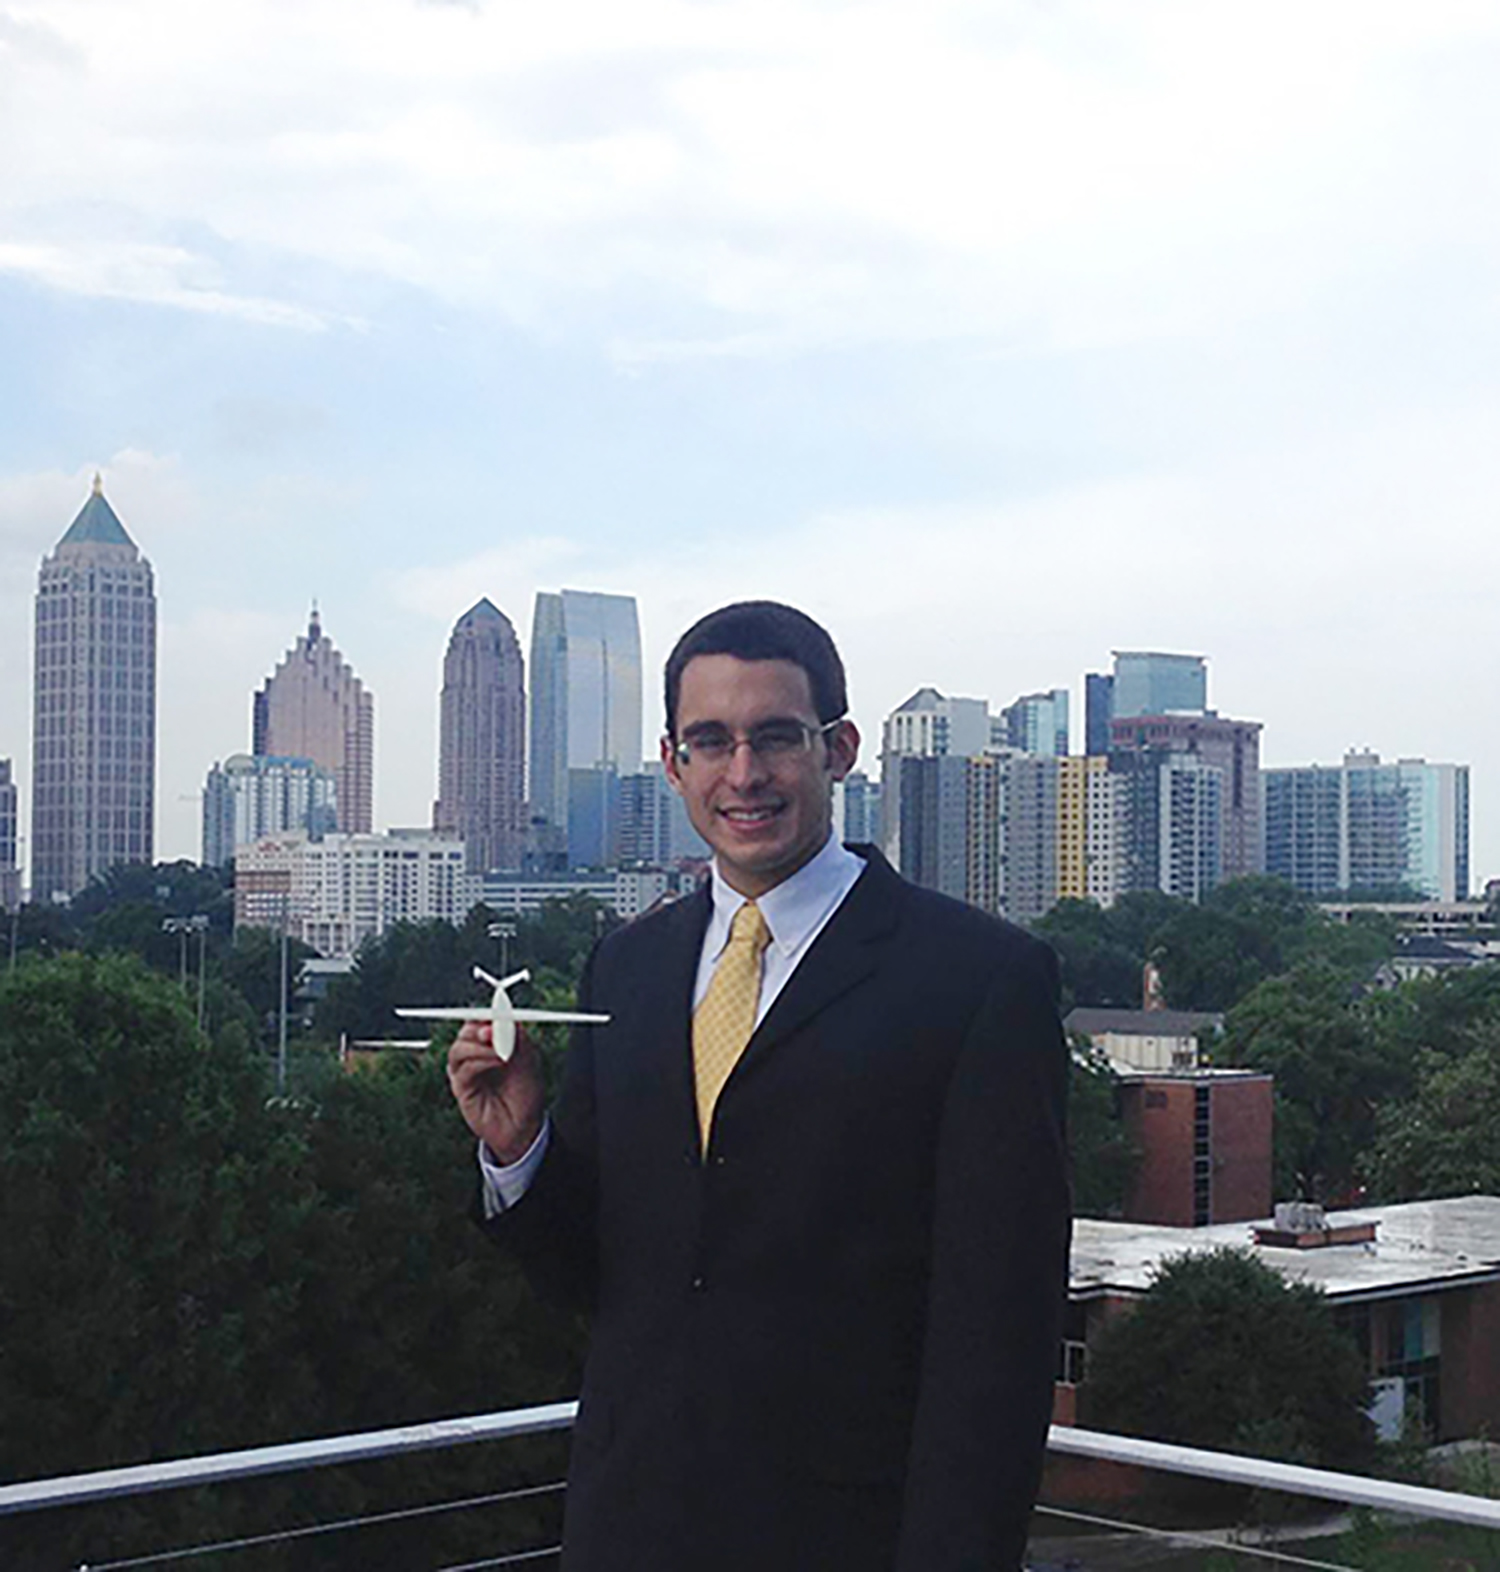 Man in a suit with a city in the background holding a model plane.